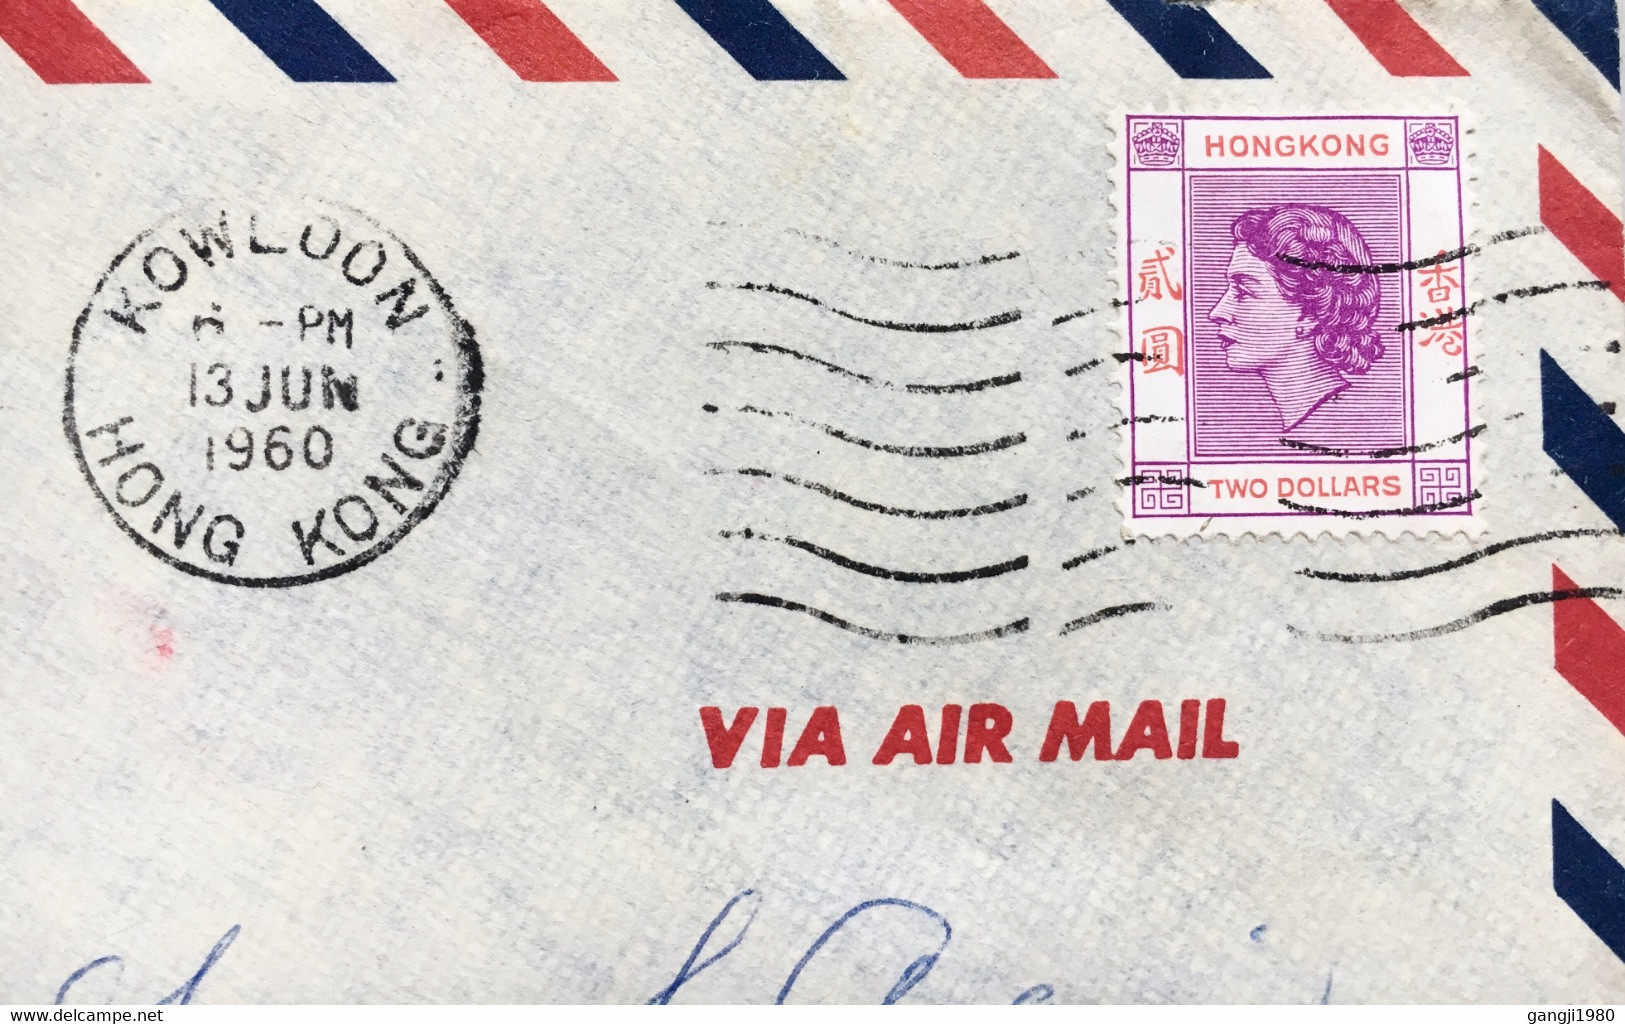 HONG KONG TO HAWAI USED, ILLUSTRATED COVER 1960, SPECIAL AMERICAN PRESIDENT LINES!!! QUEEN 2$ STAMP, KOWLOON. - Briefe U. Dokumente